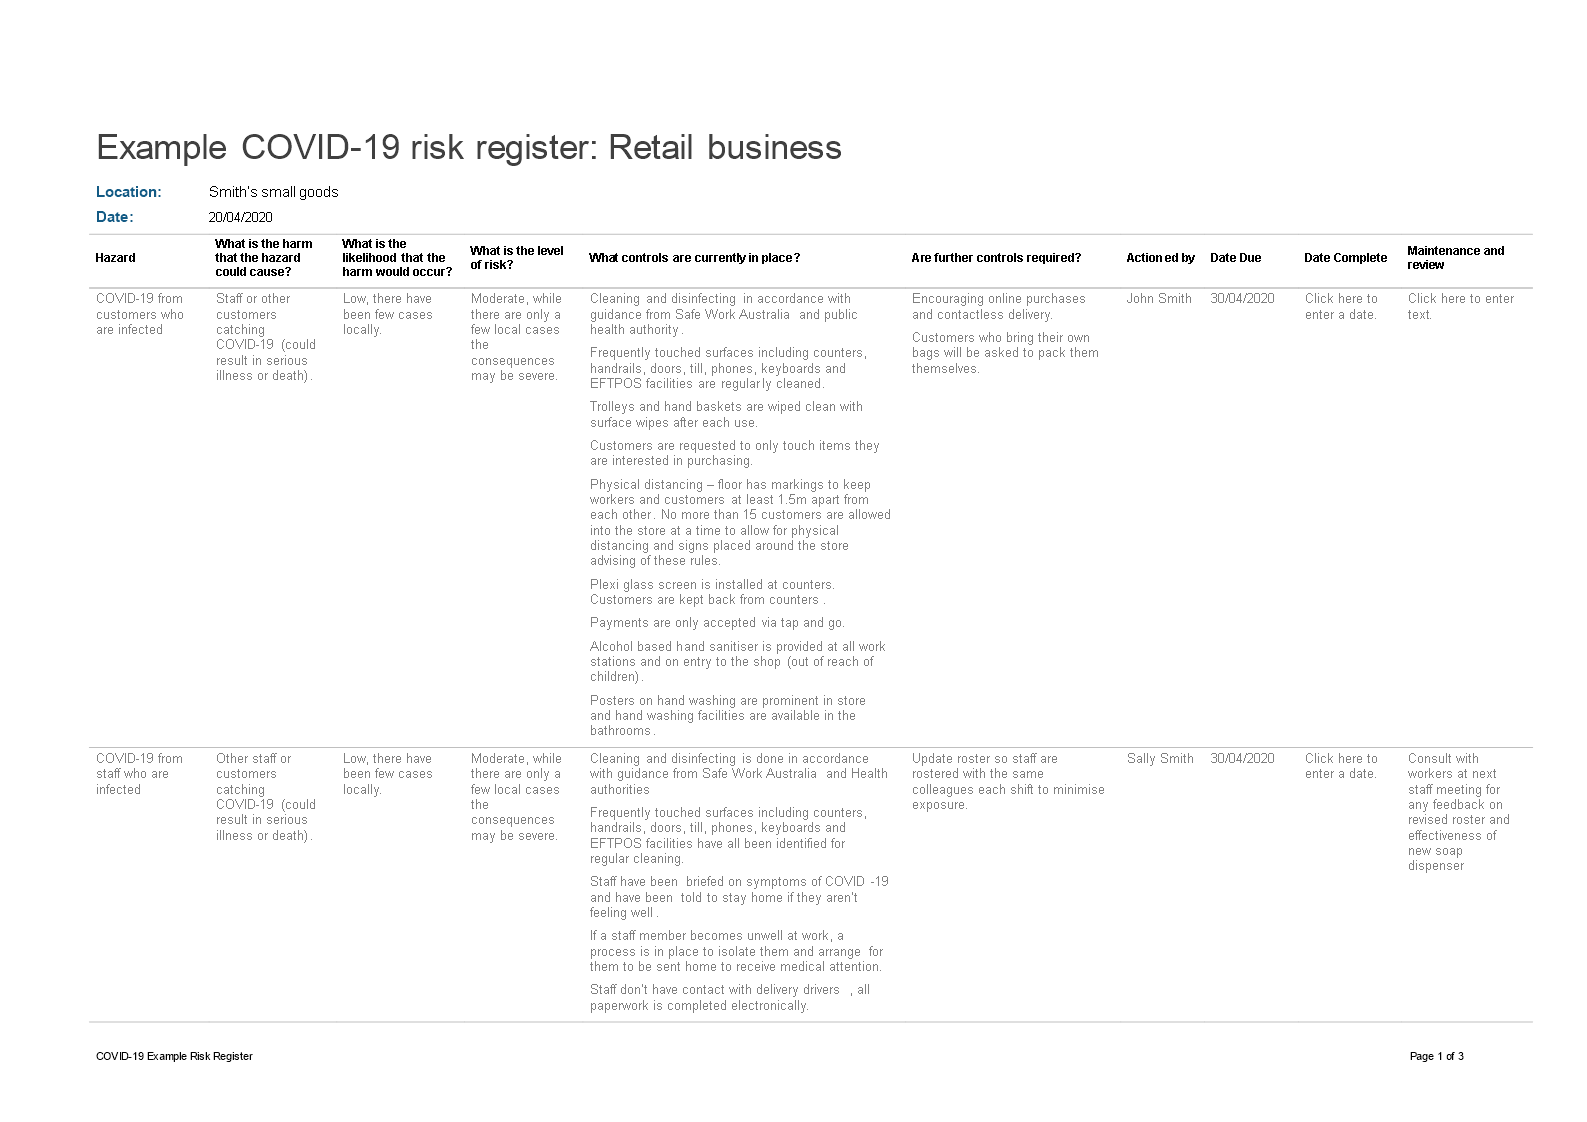 COVID19 Retail Business Risk Register main image